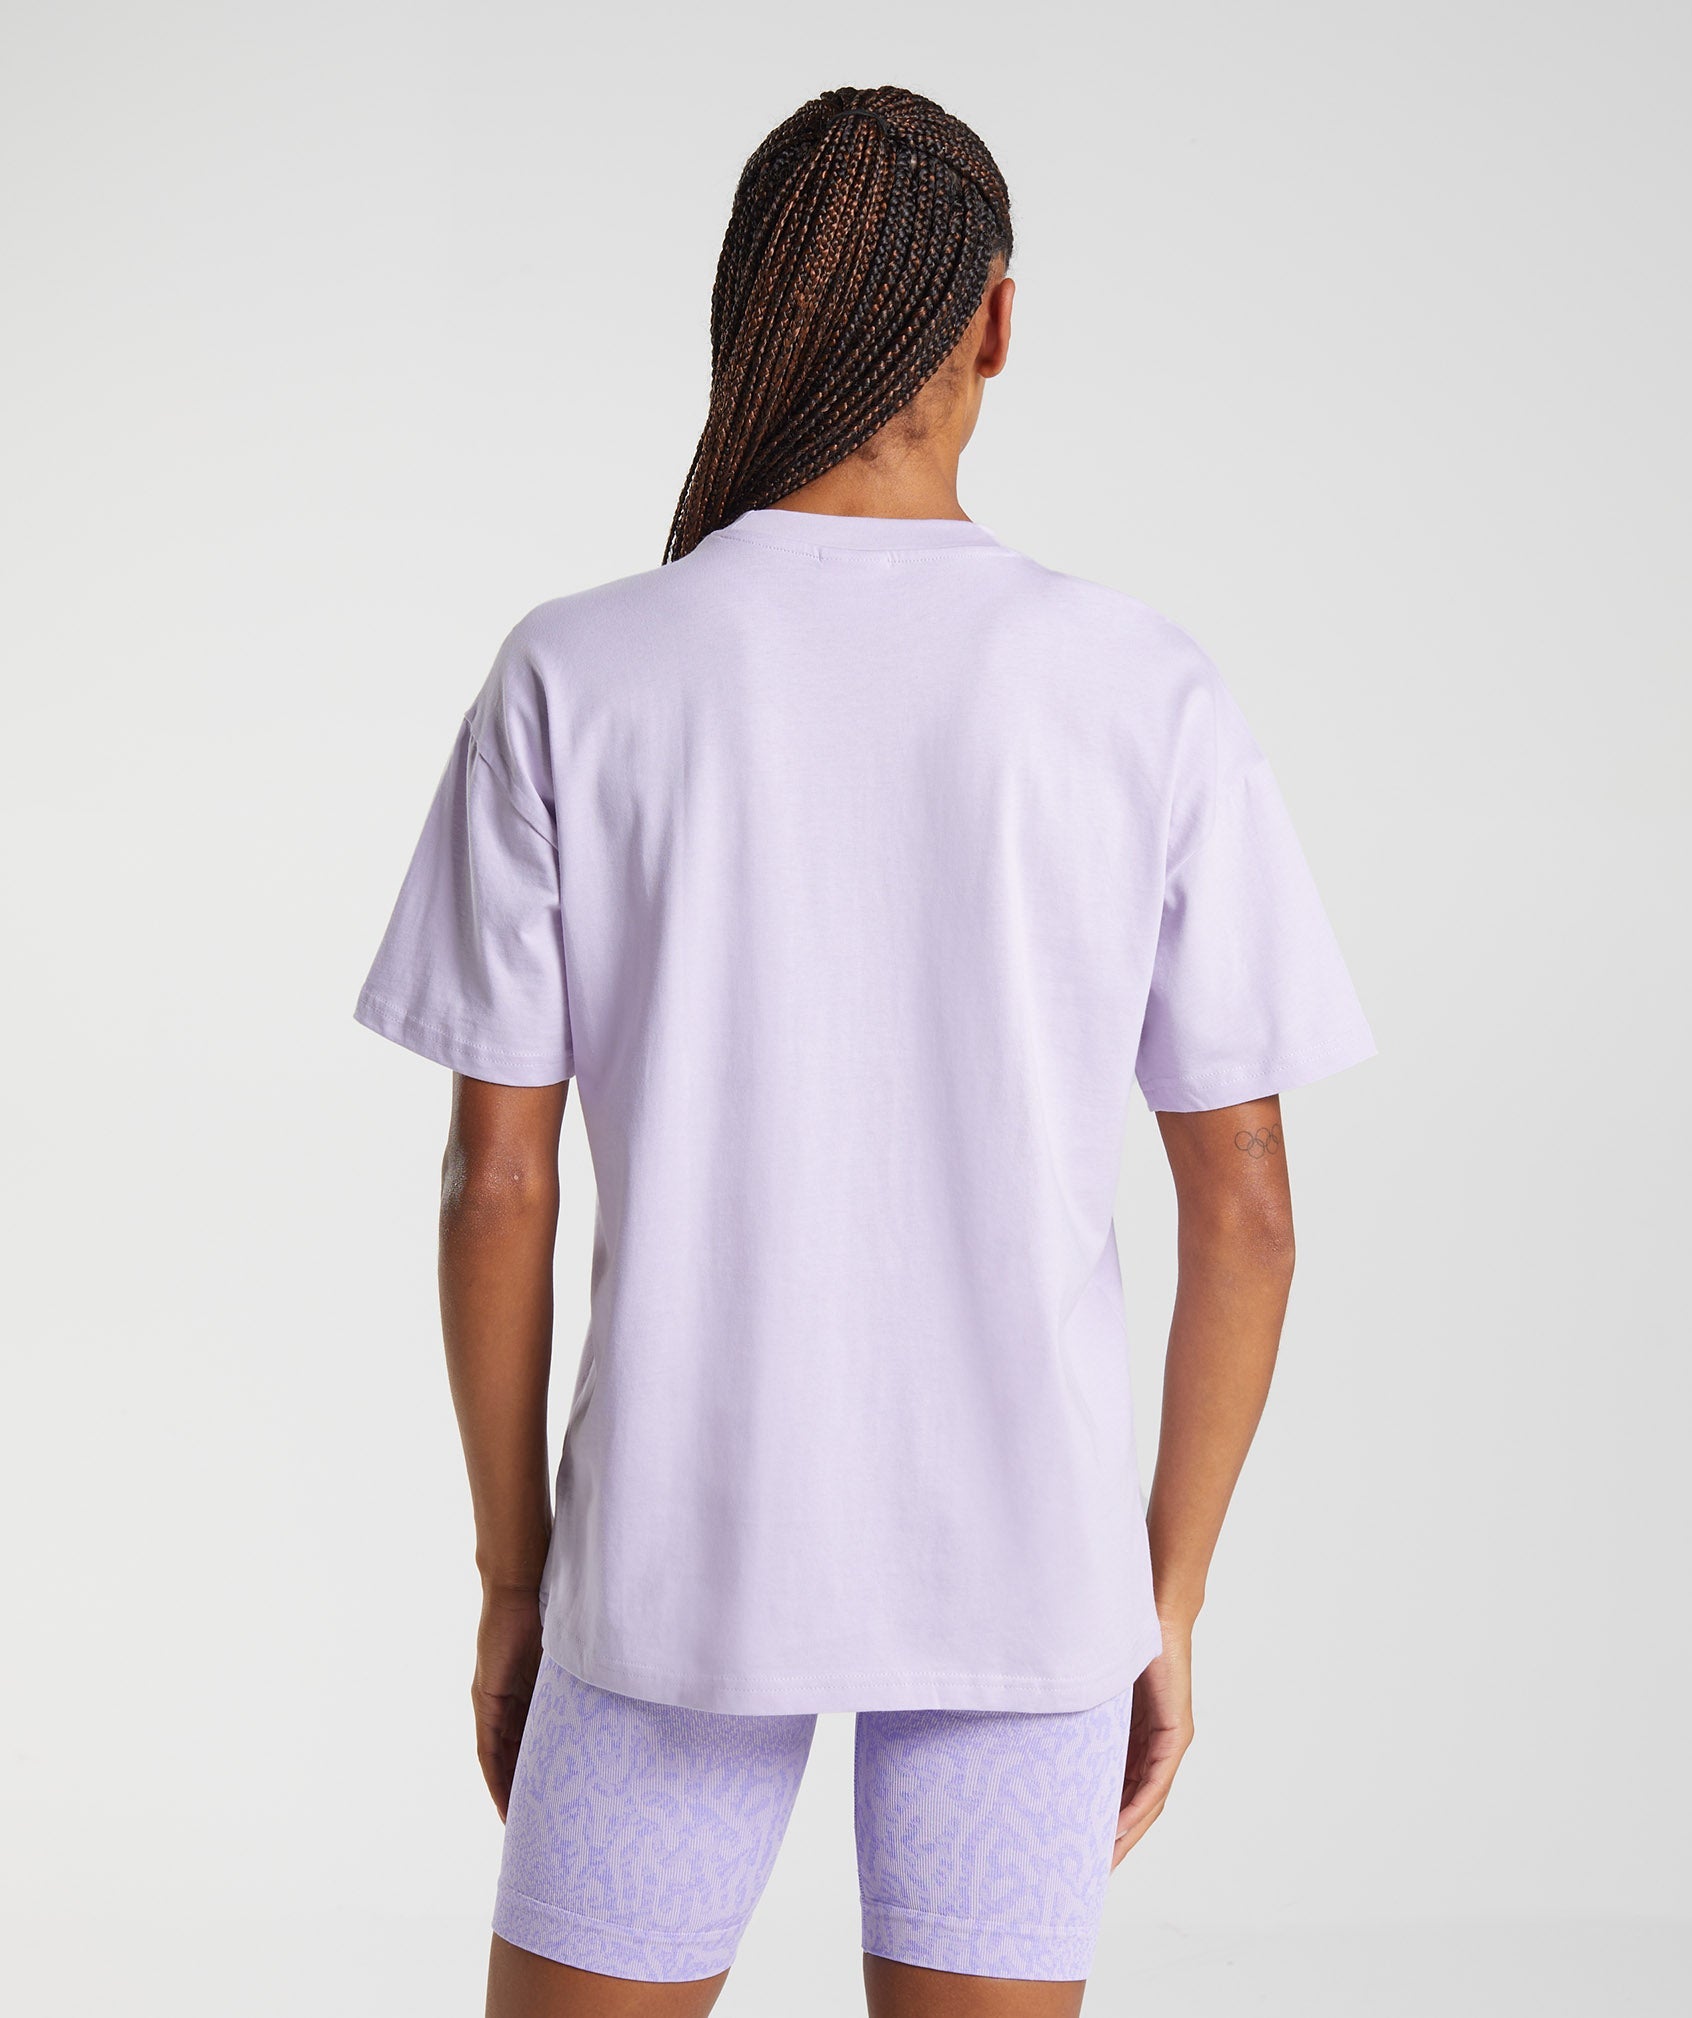 Training Oversized T-shirt in Soft Lilac - view 2